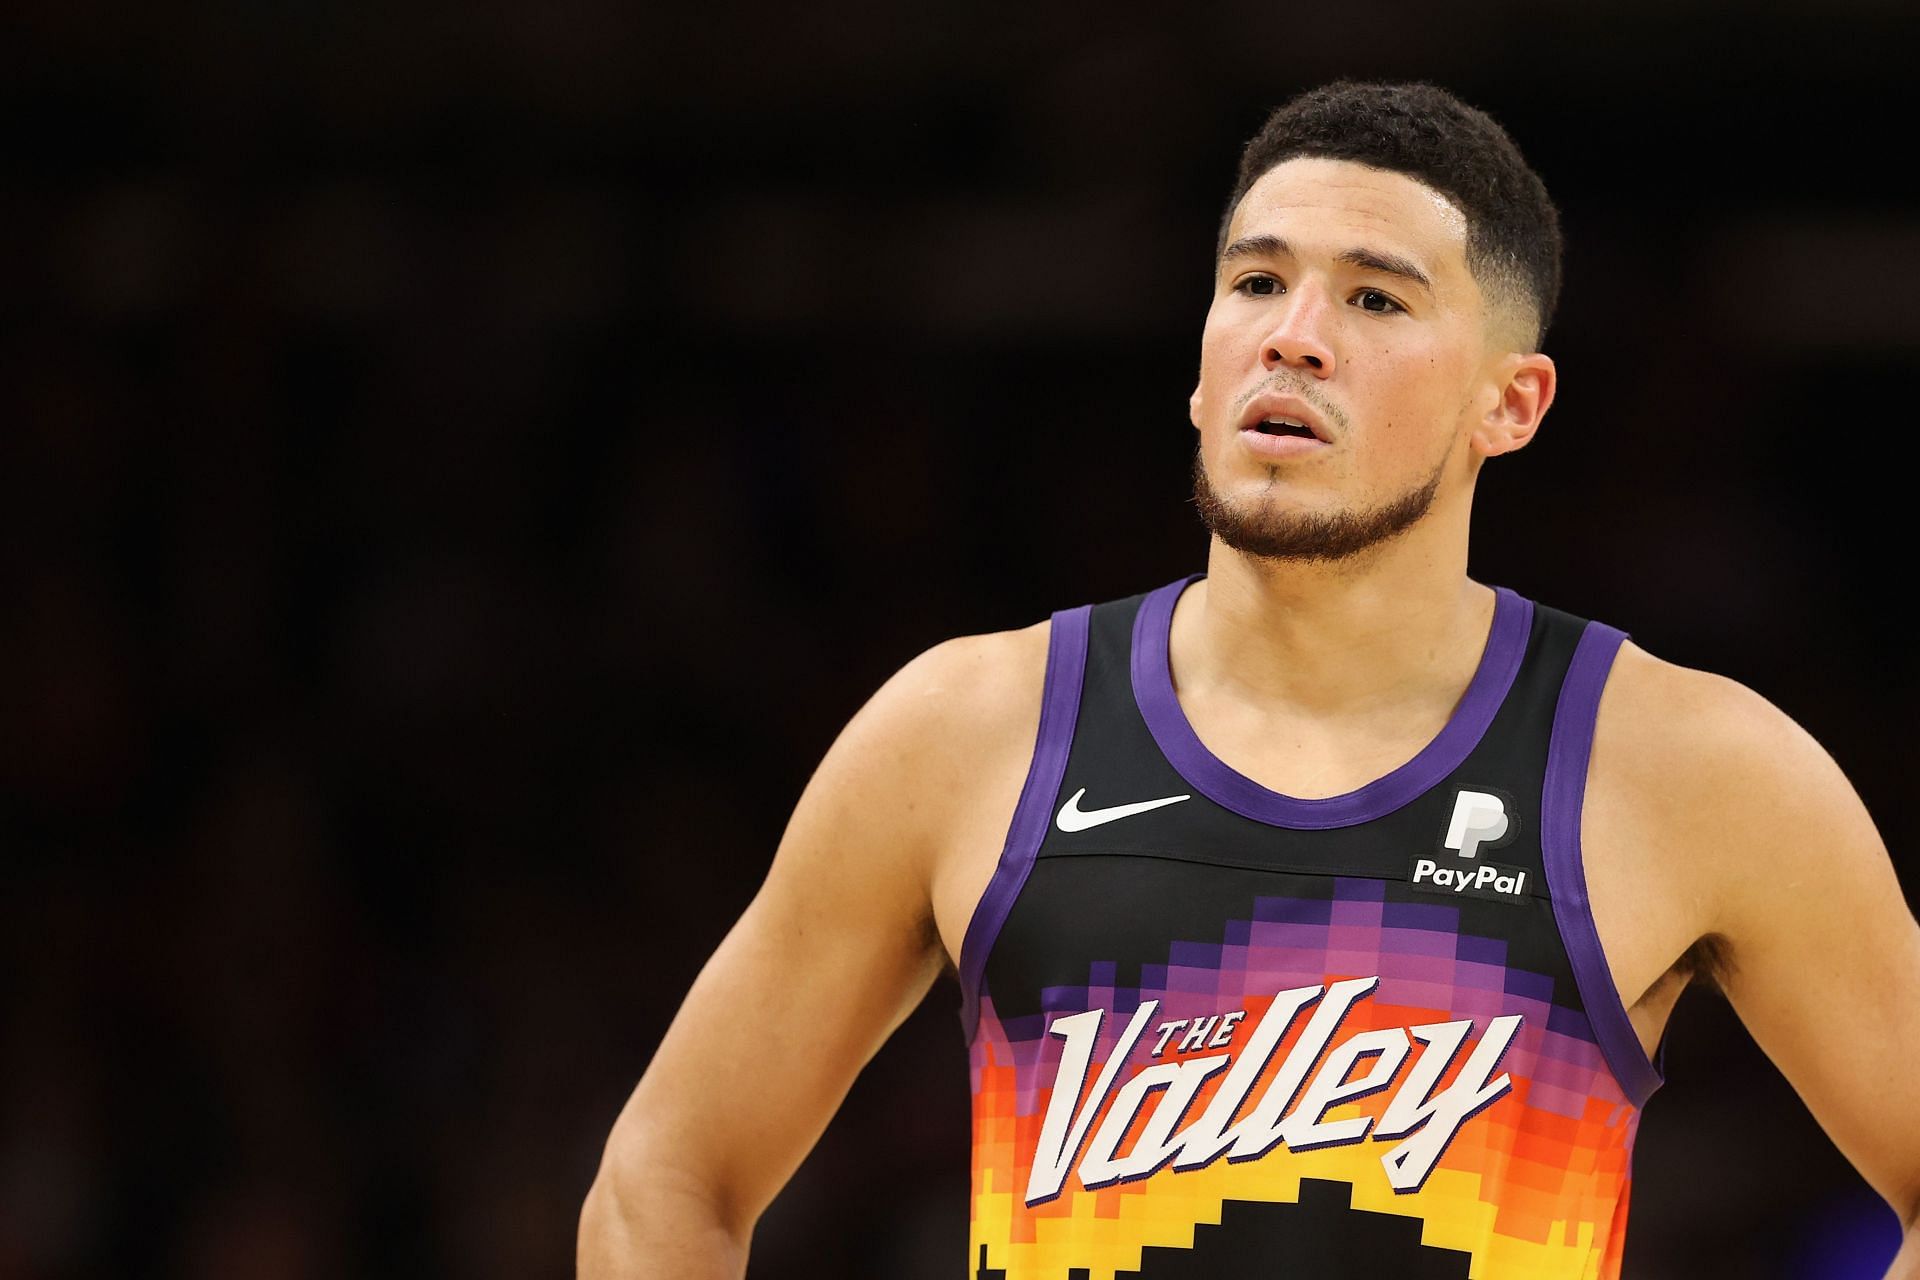 Phoenix Suns fans are thrilled the team selected Devin Booker right before the Thunder